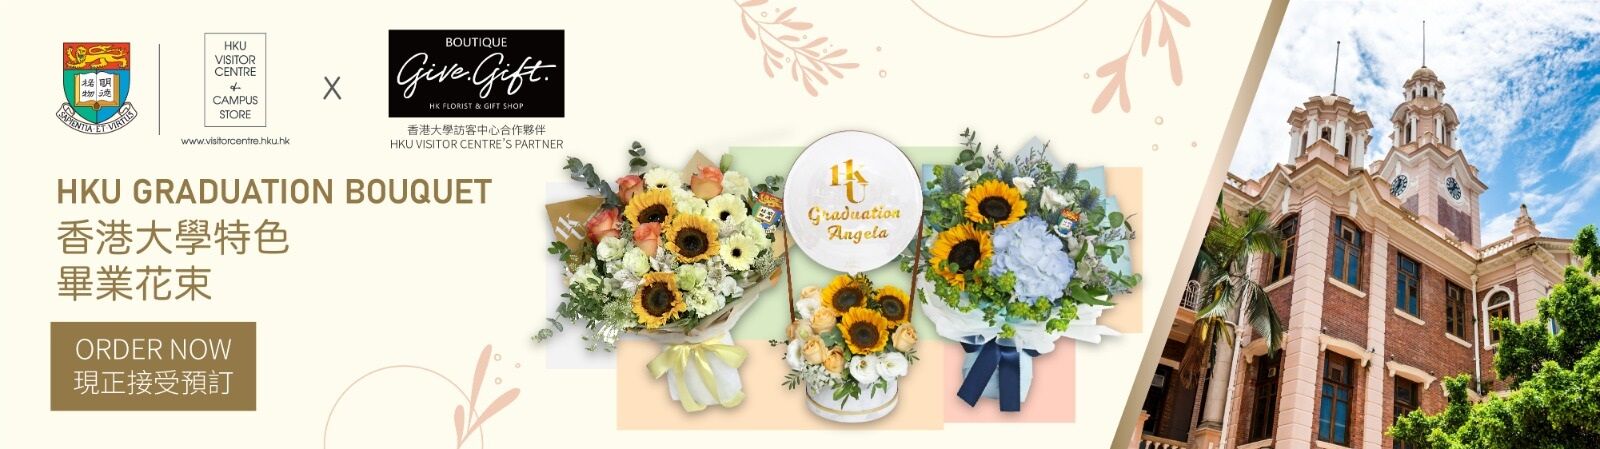 HKU Visitor Centre × Give Gift Boutique Customized Graduation Bouquets for HKU Graduates